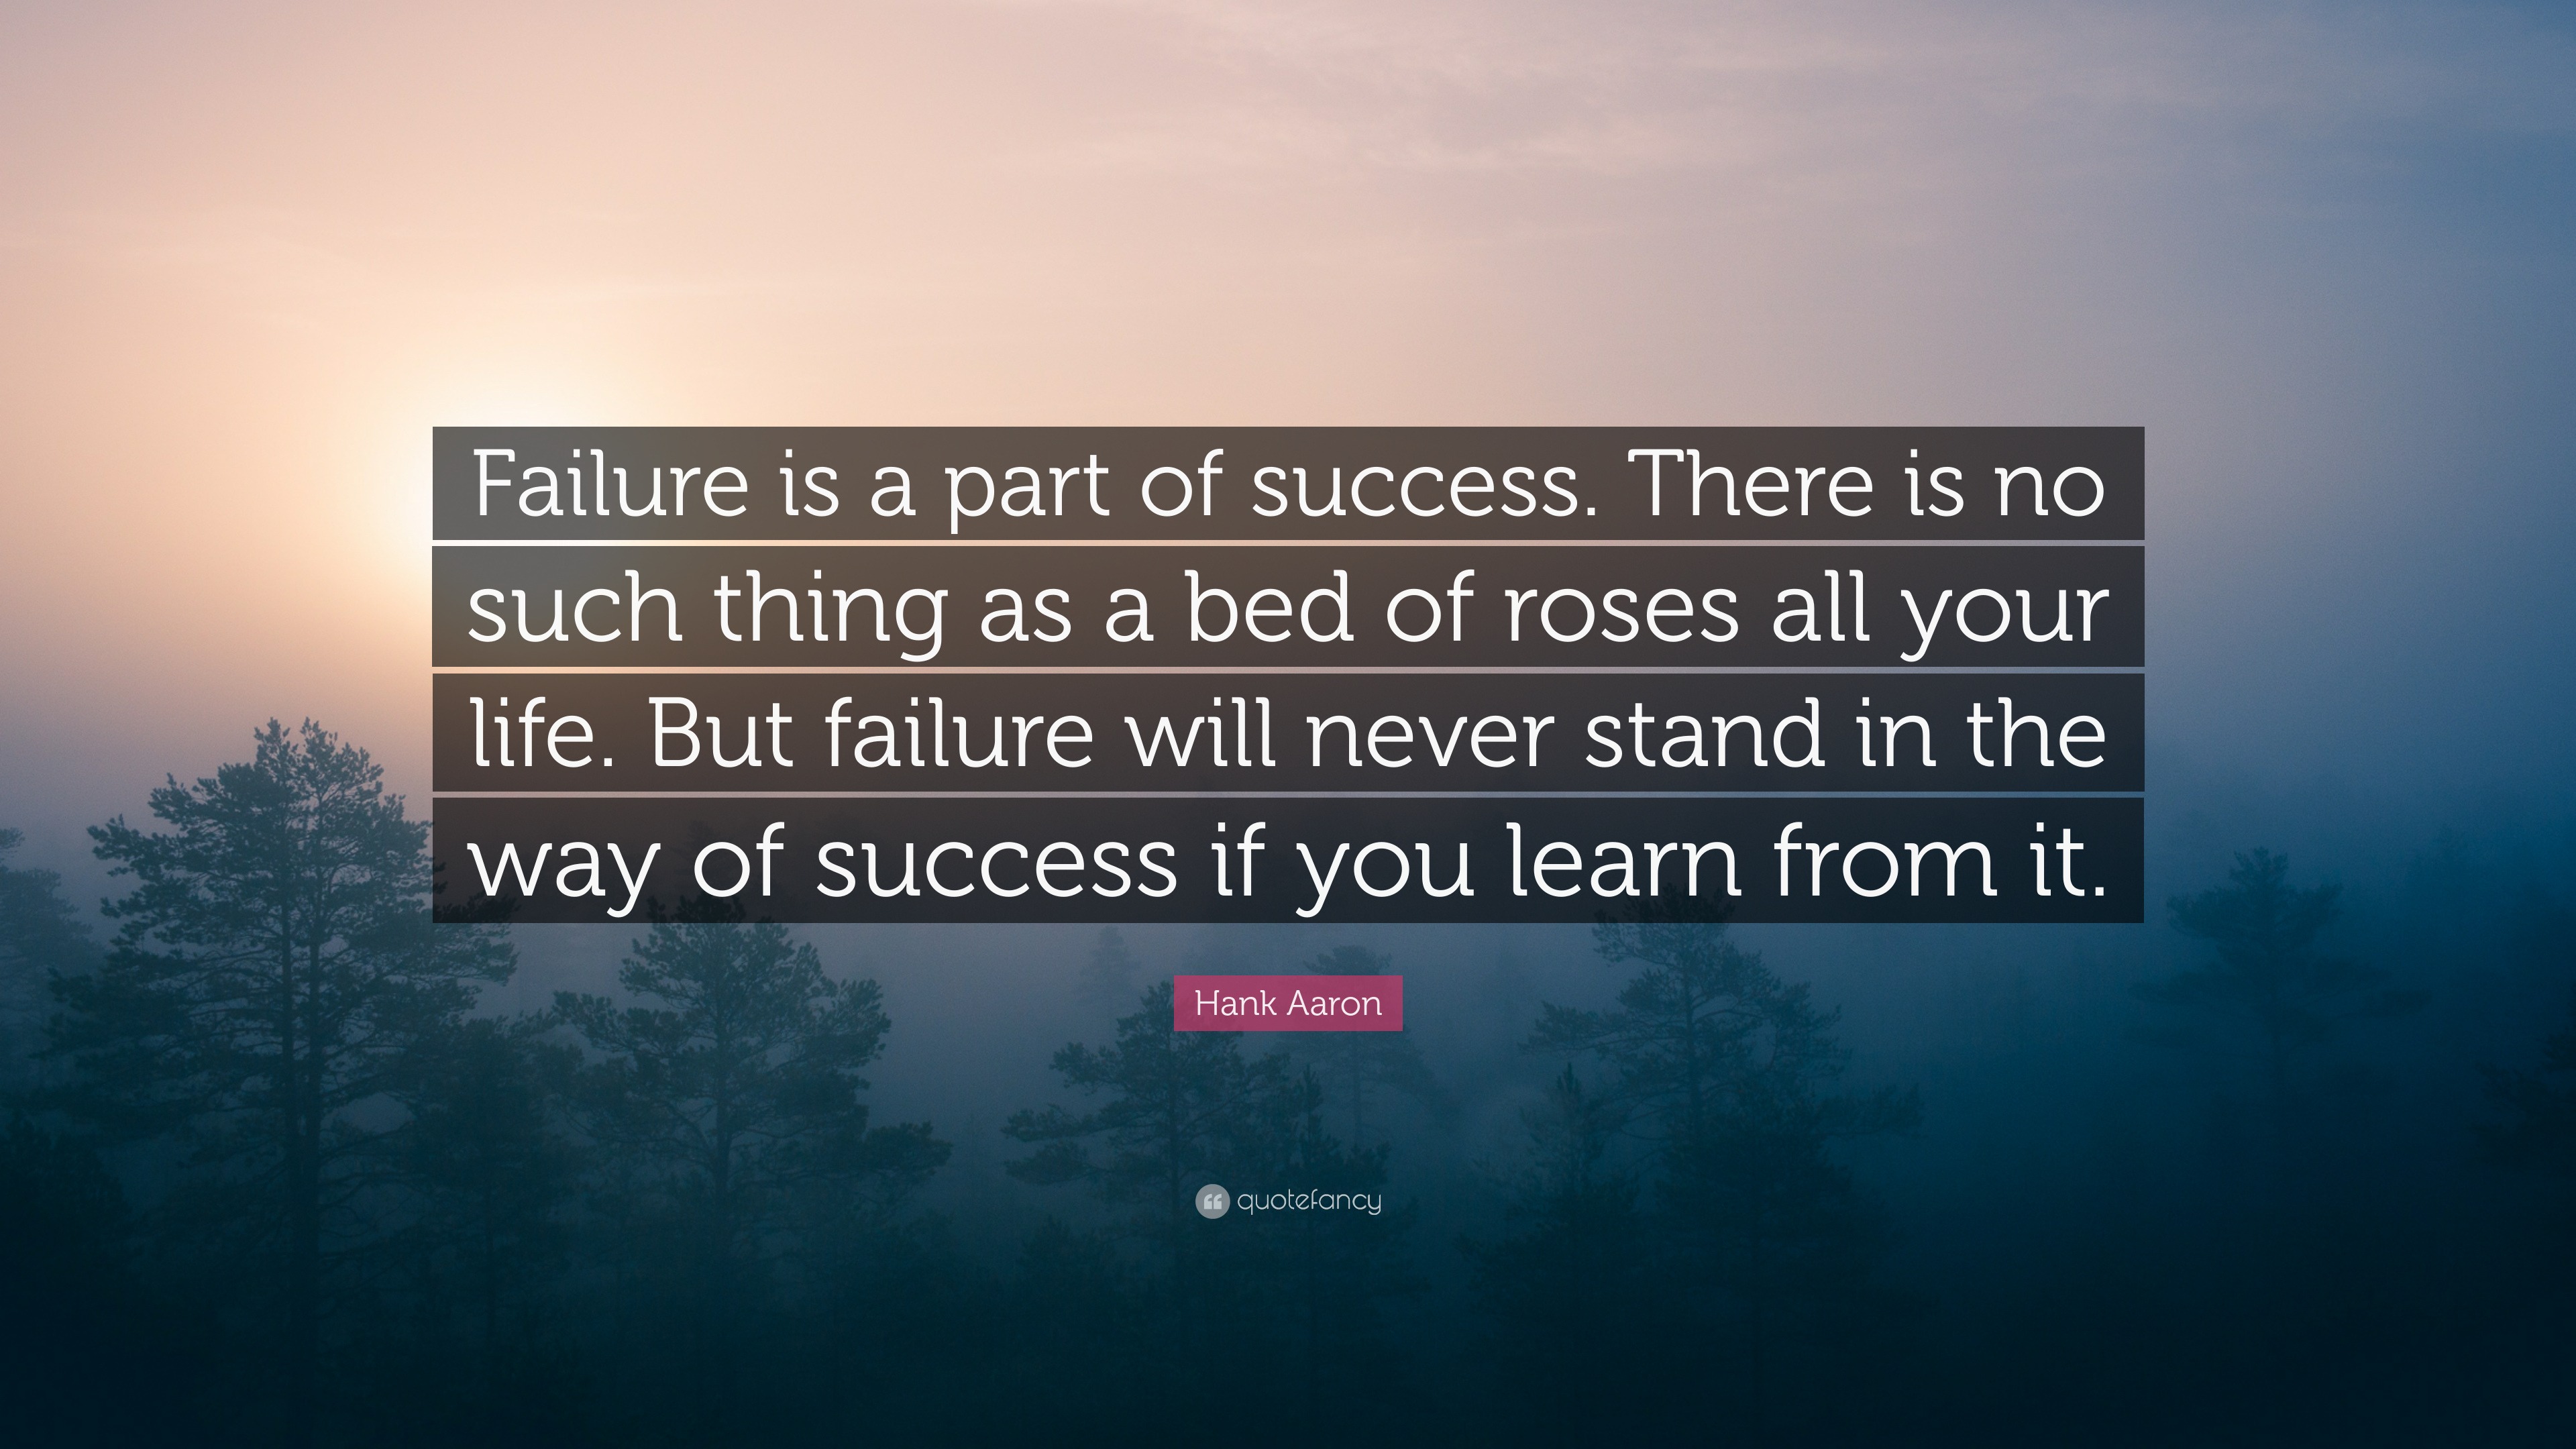 Hank Aaron Quote: “Failure is a part of success. There is no such